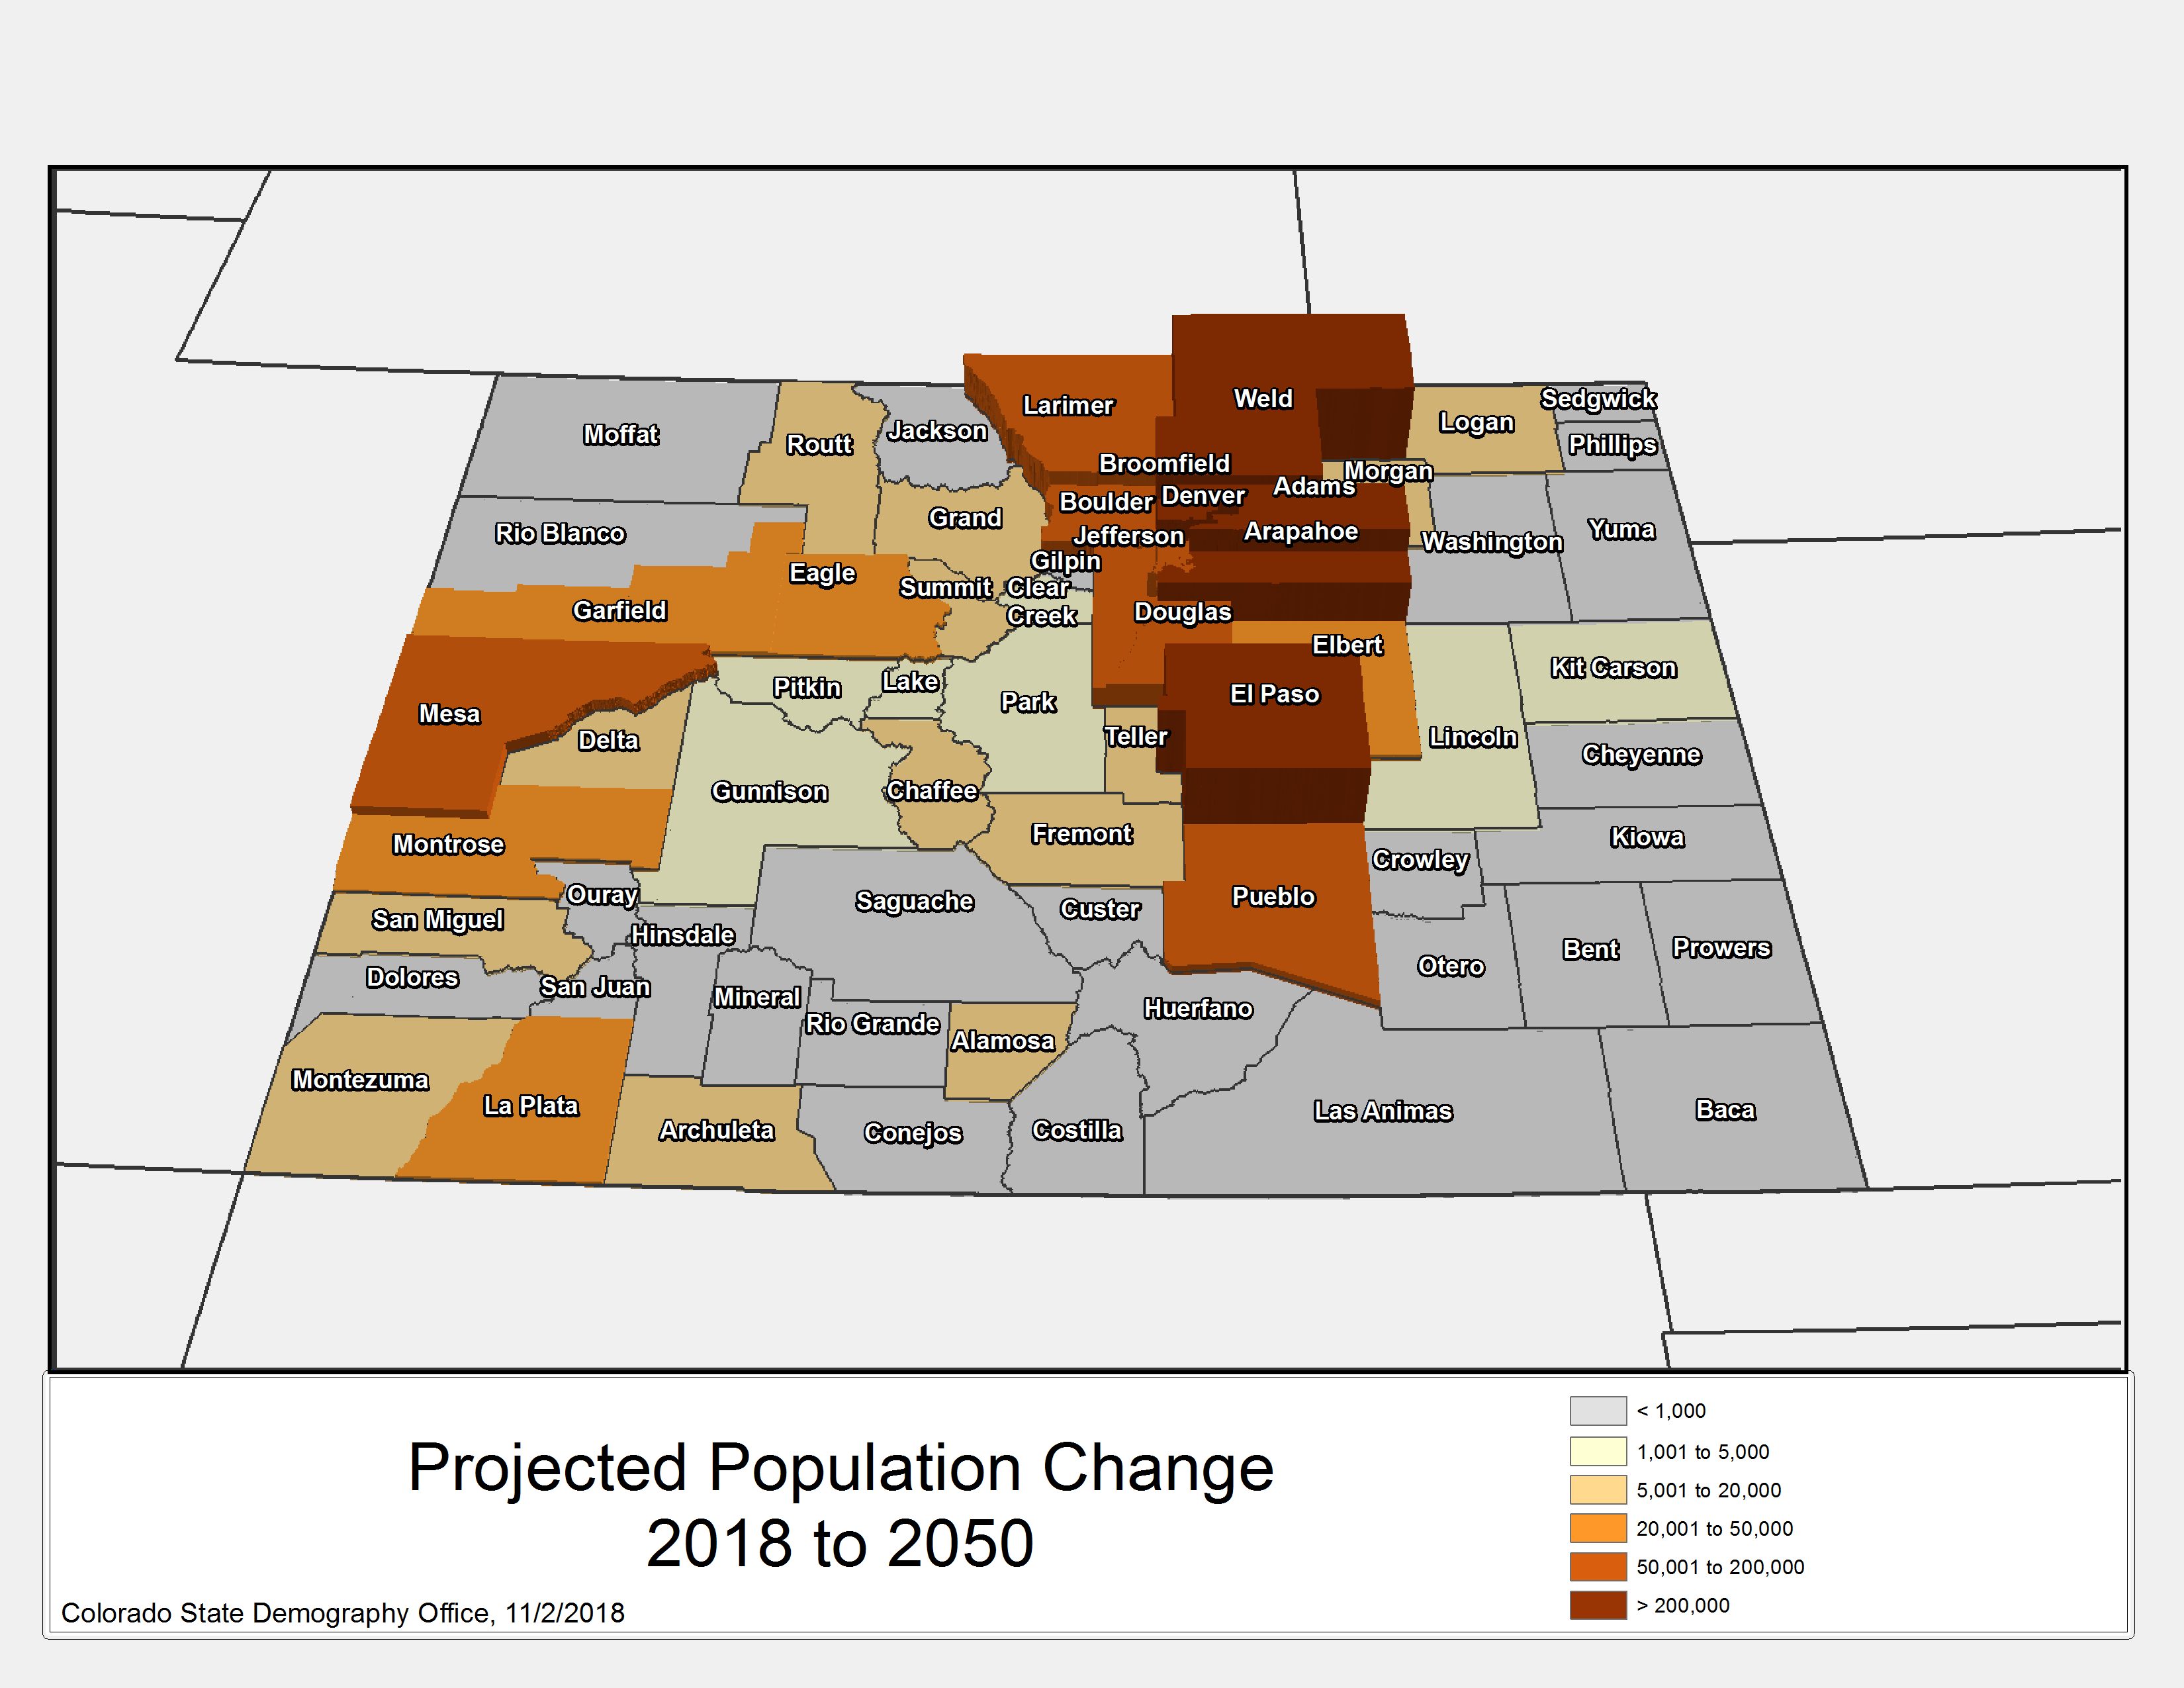 Colorado Map showing projected population change 2018-2050.